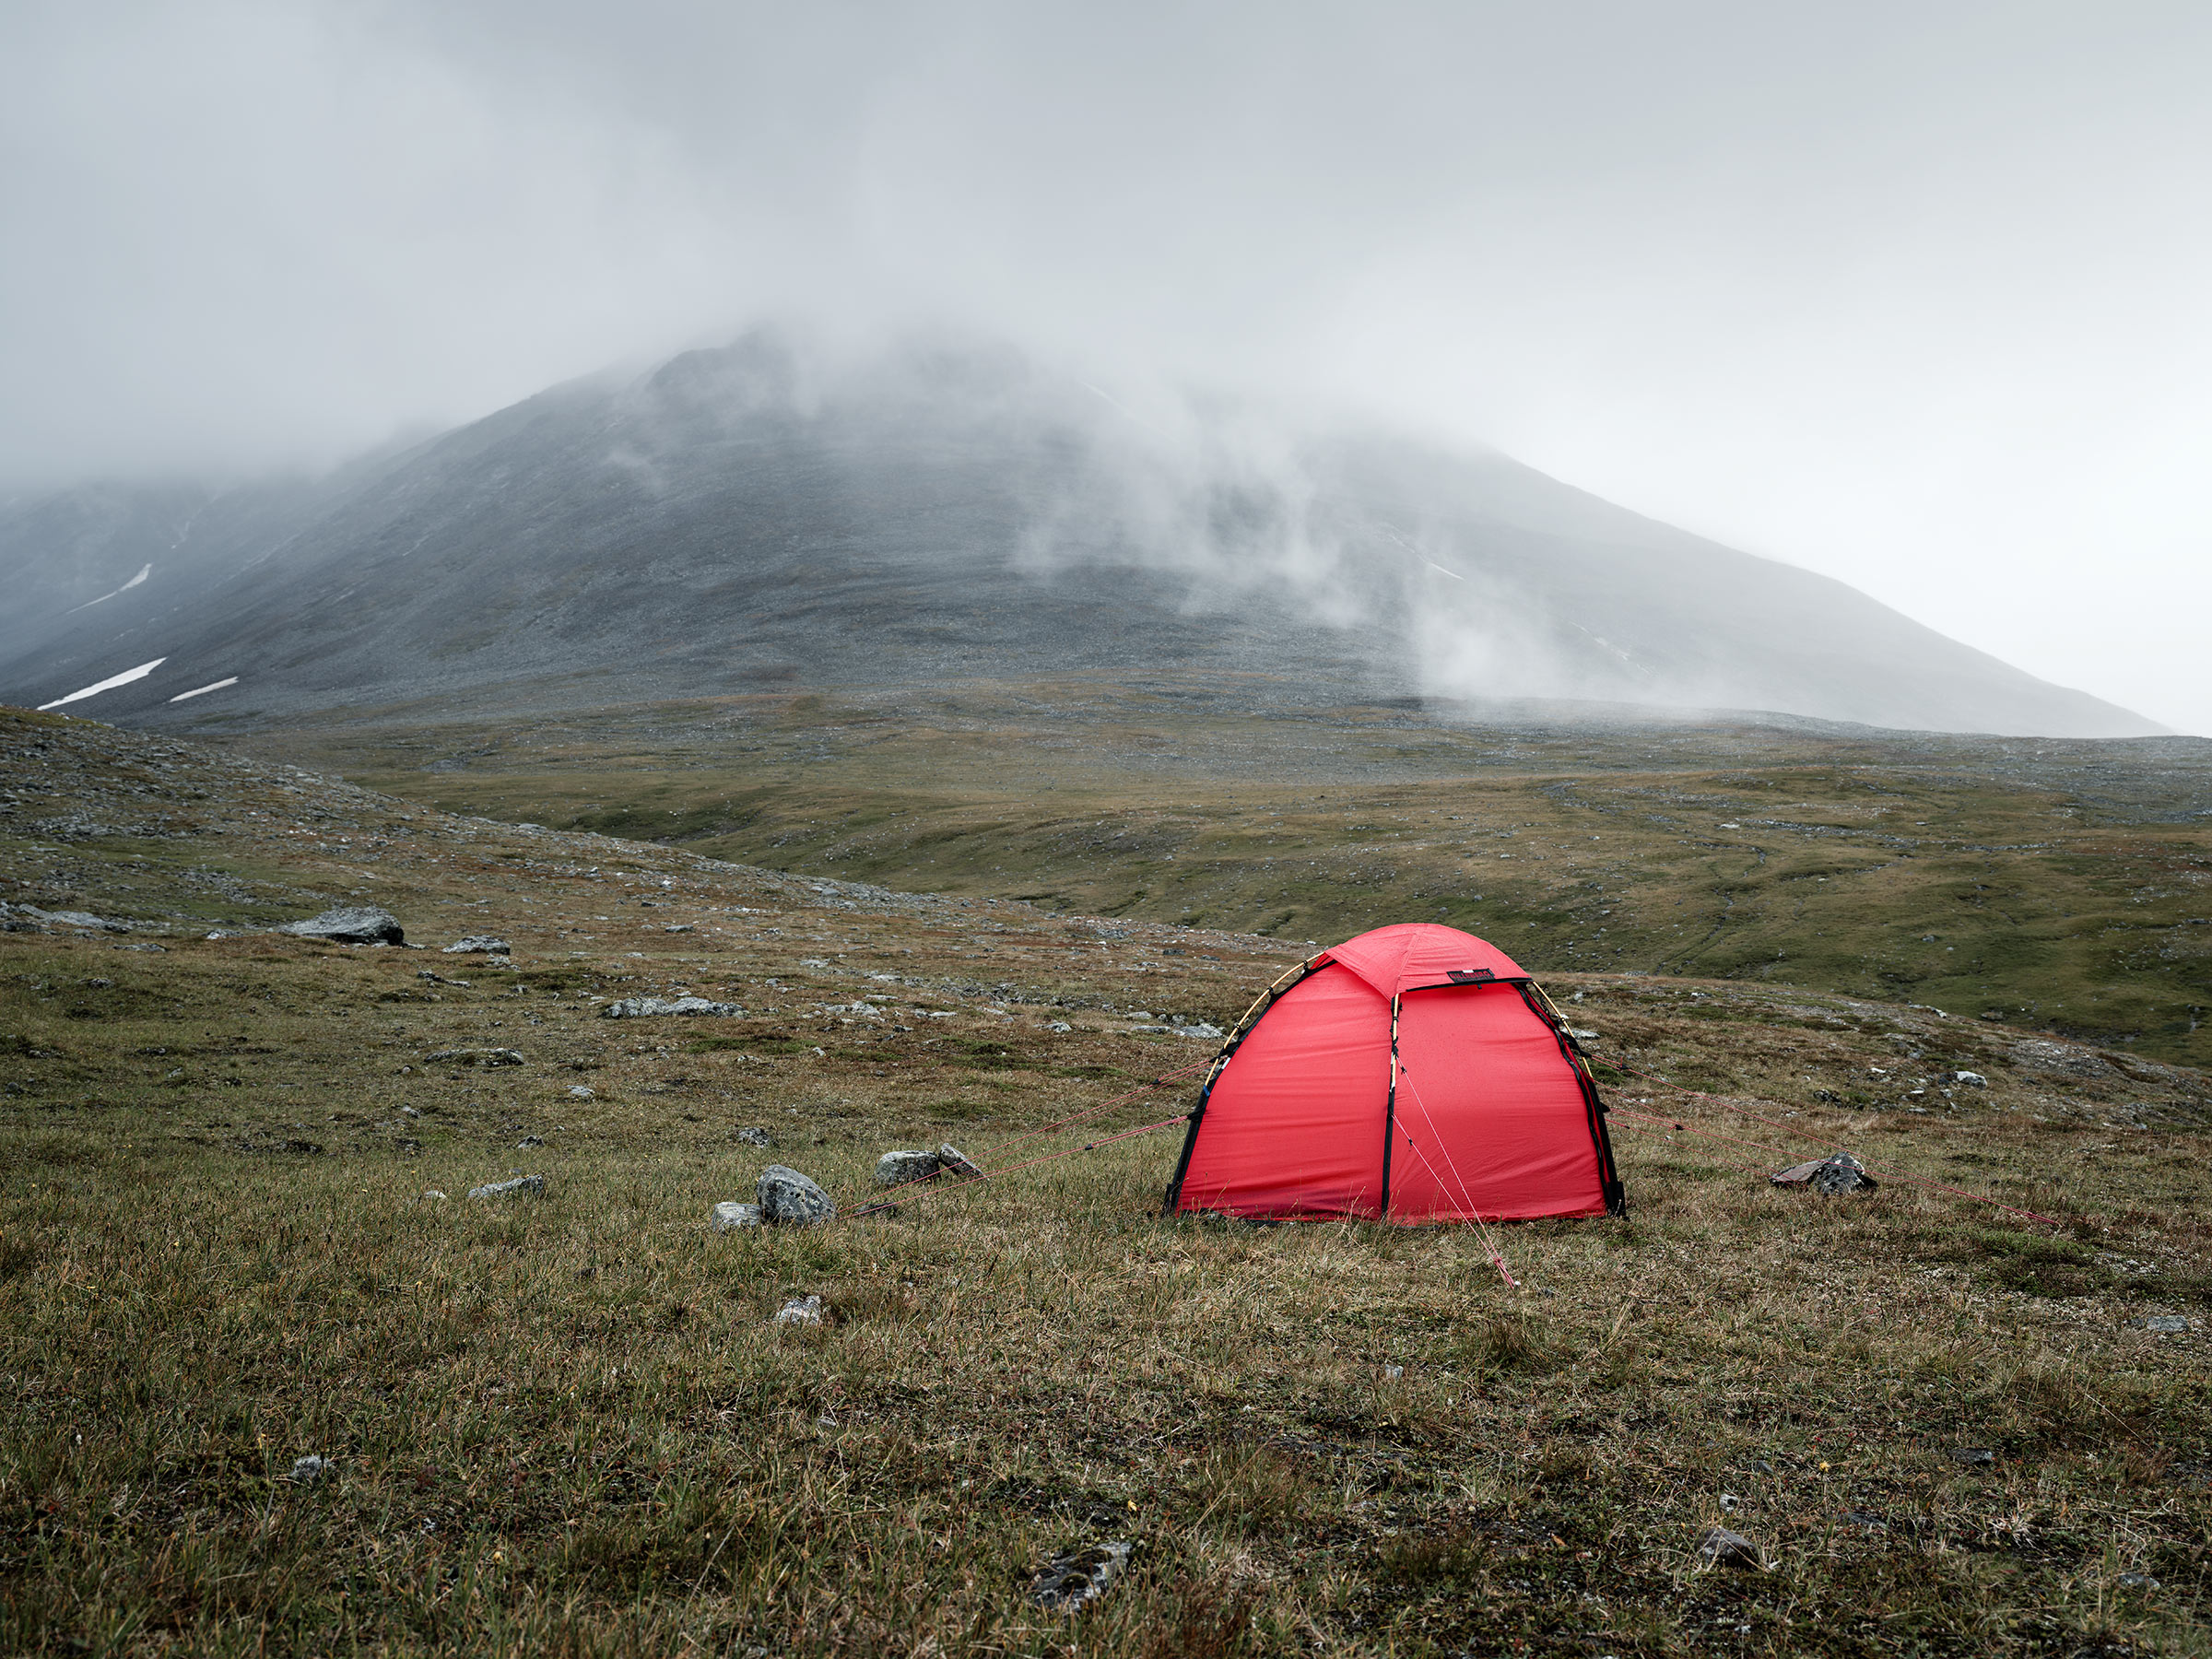 Hilleberg Soulo during a storm in Sarek National Park.